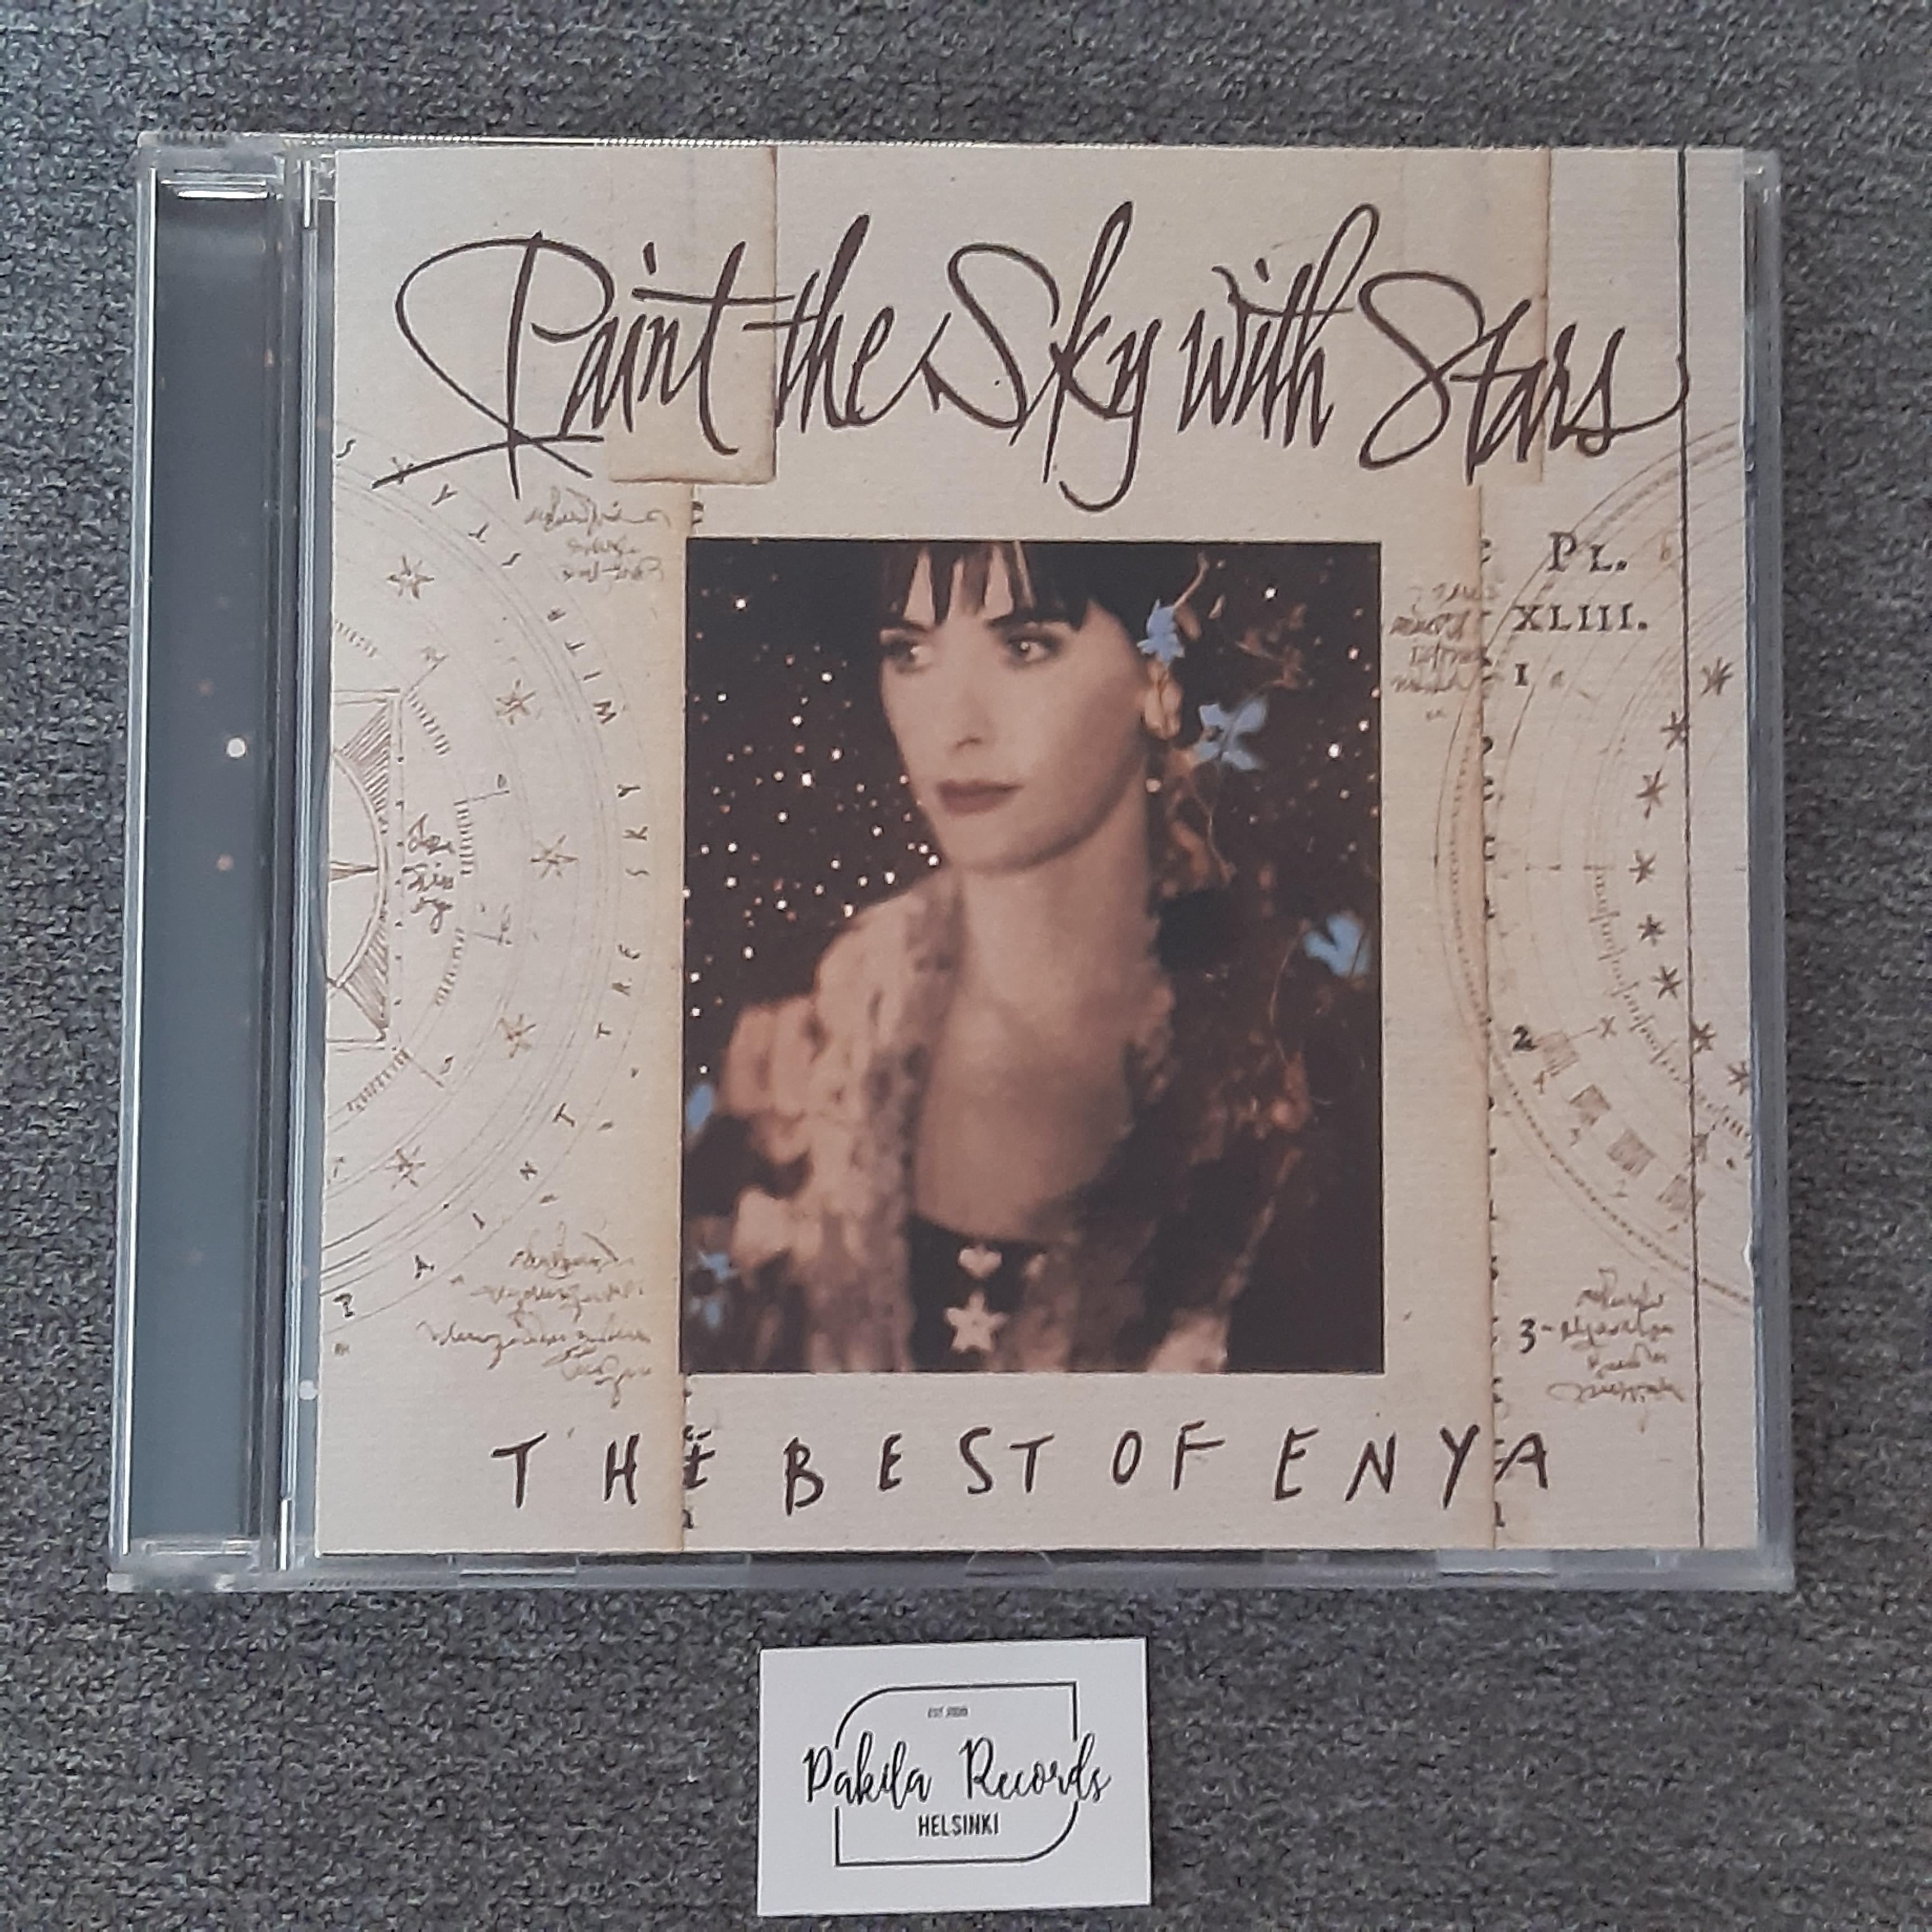 Enya - Paint The Sky With Stars, The Best Of Enya - CD (käytetty)